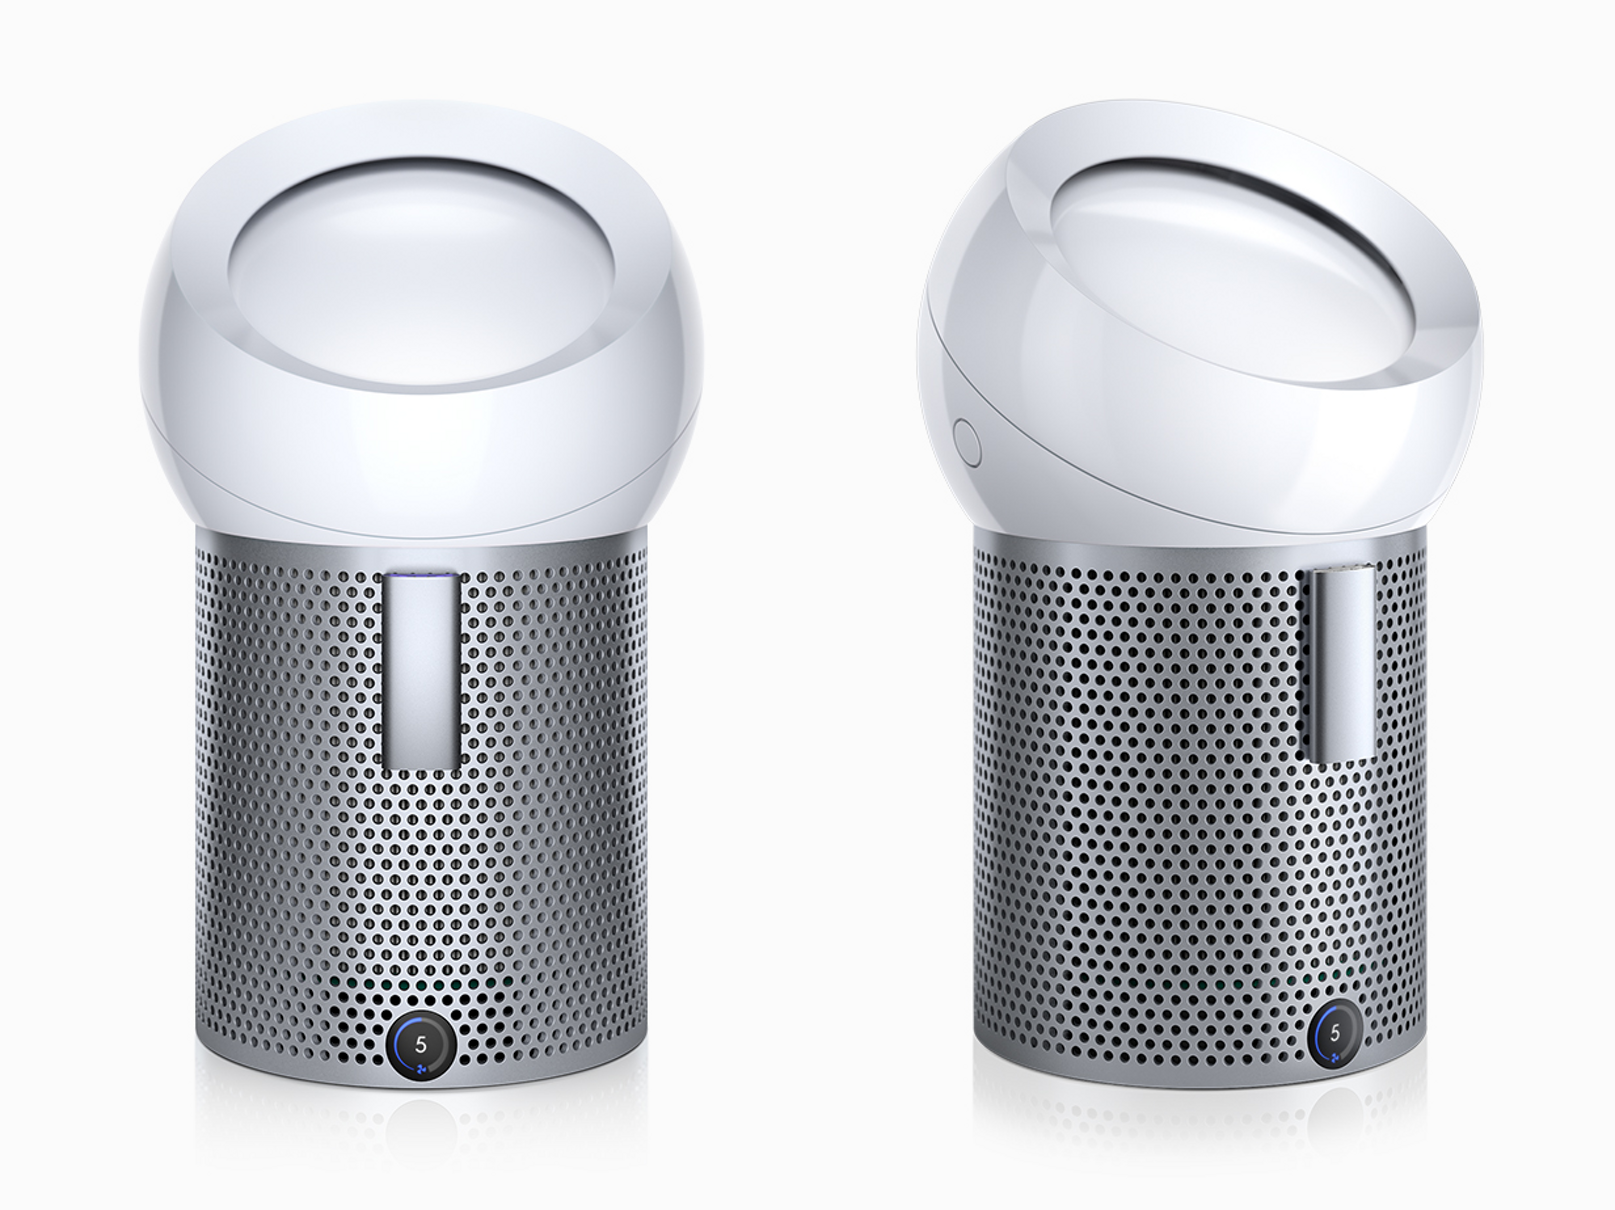 The Dyson Pure Cool Me personal purifying fan in white and silver, featuring a cylindrical body and a unique dome top